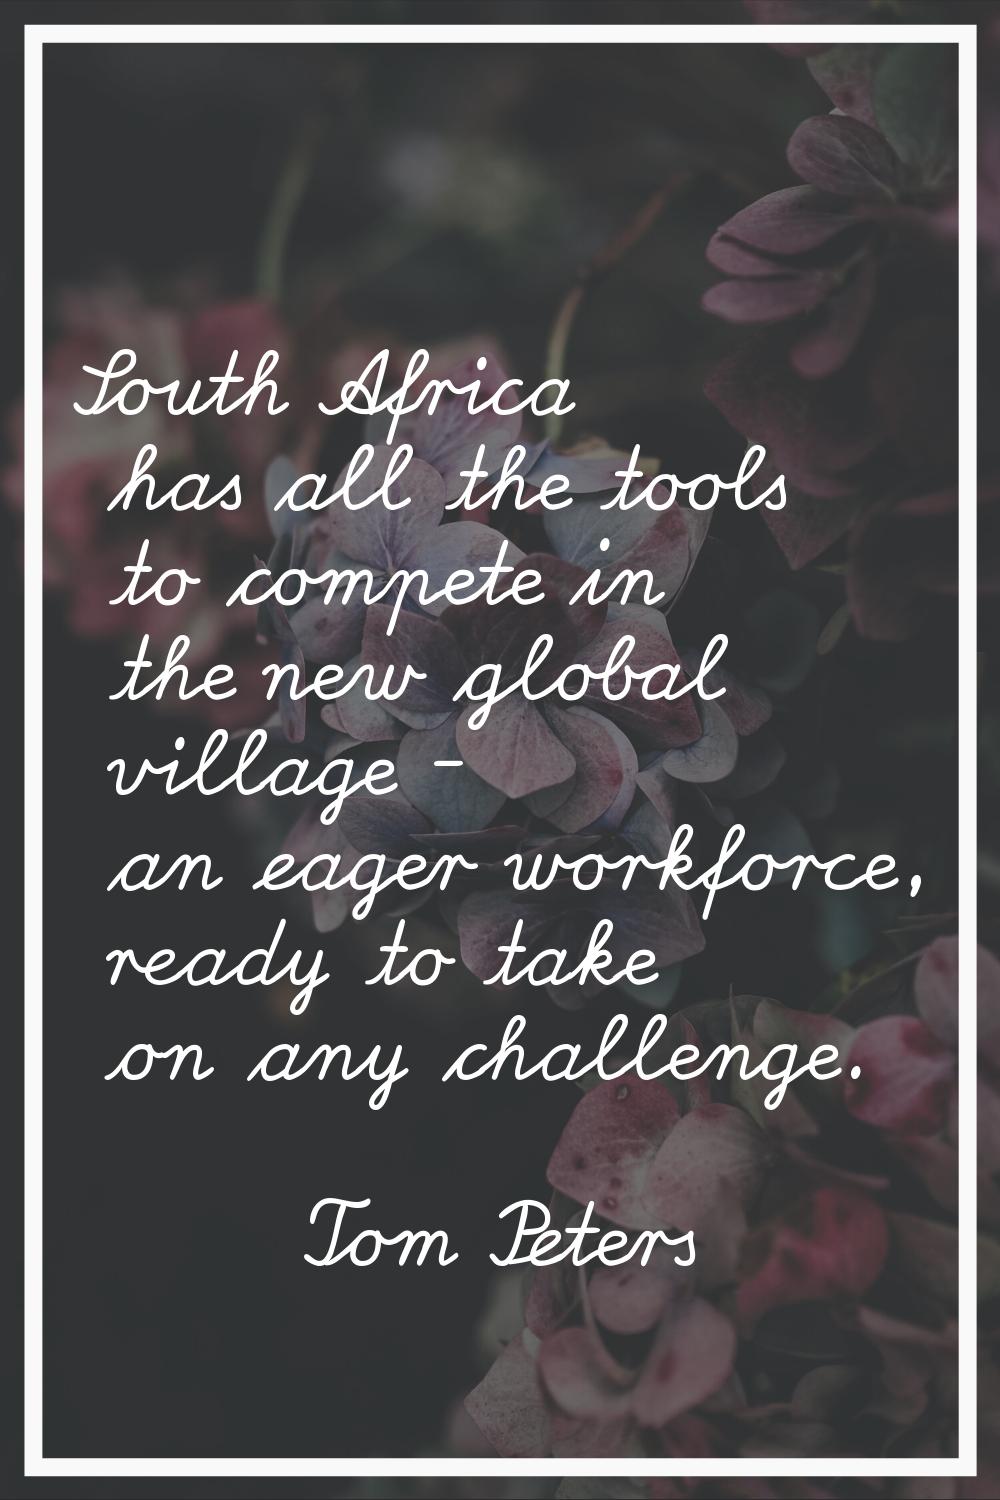 South Africa has all the tools to compete in the new global village - an eager workforce, ready to 